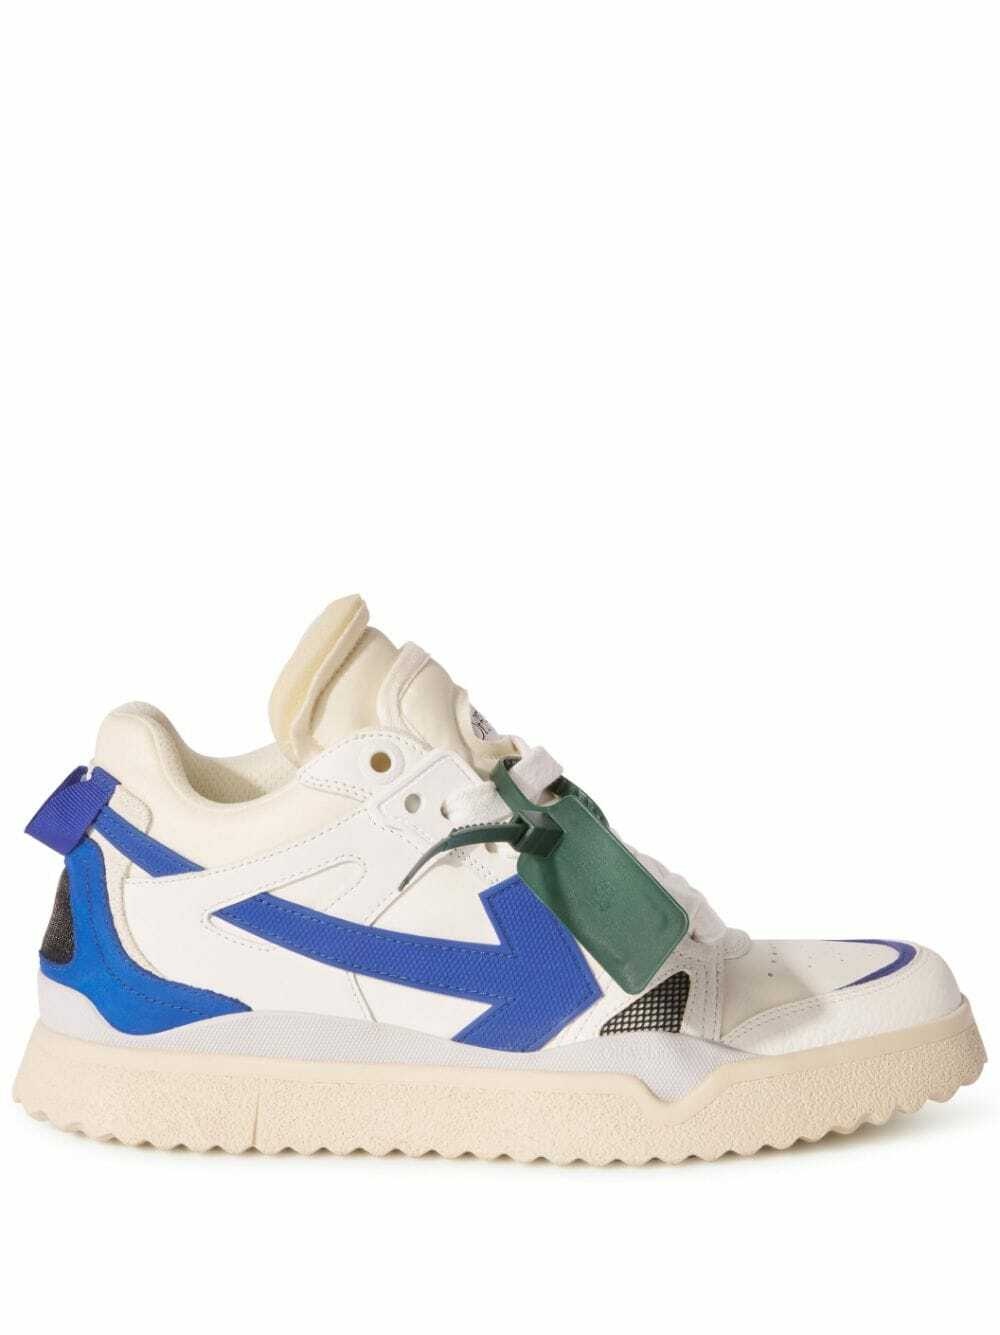 OFF-WHITE - Mid Top Sponge Sneakers Off-White